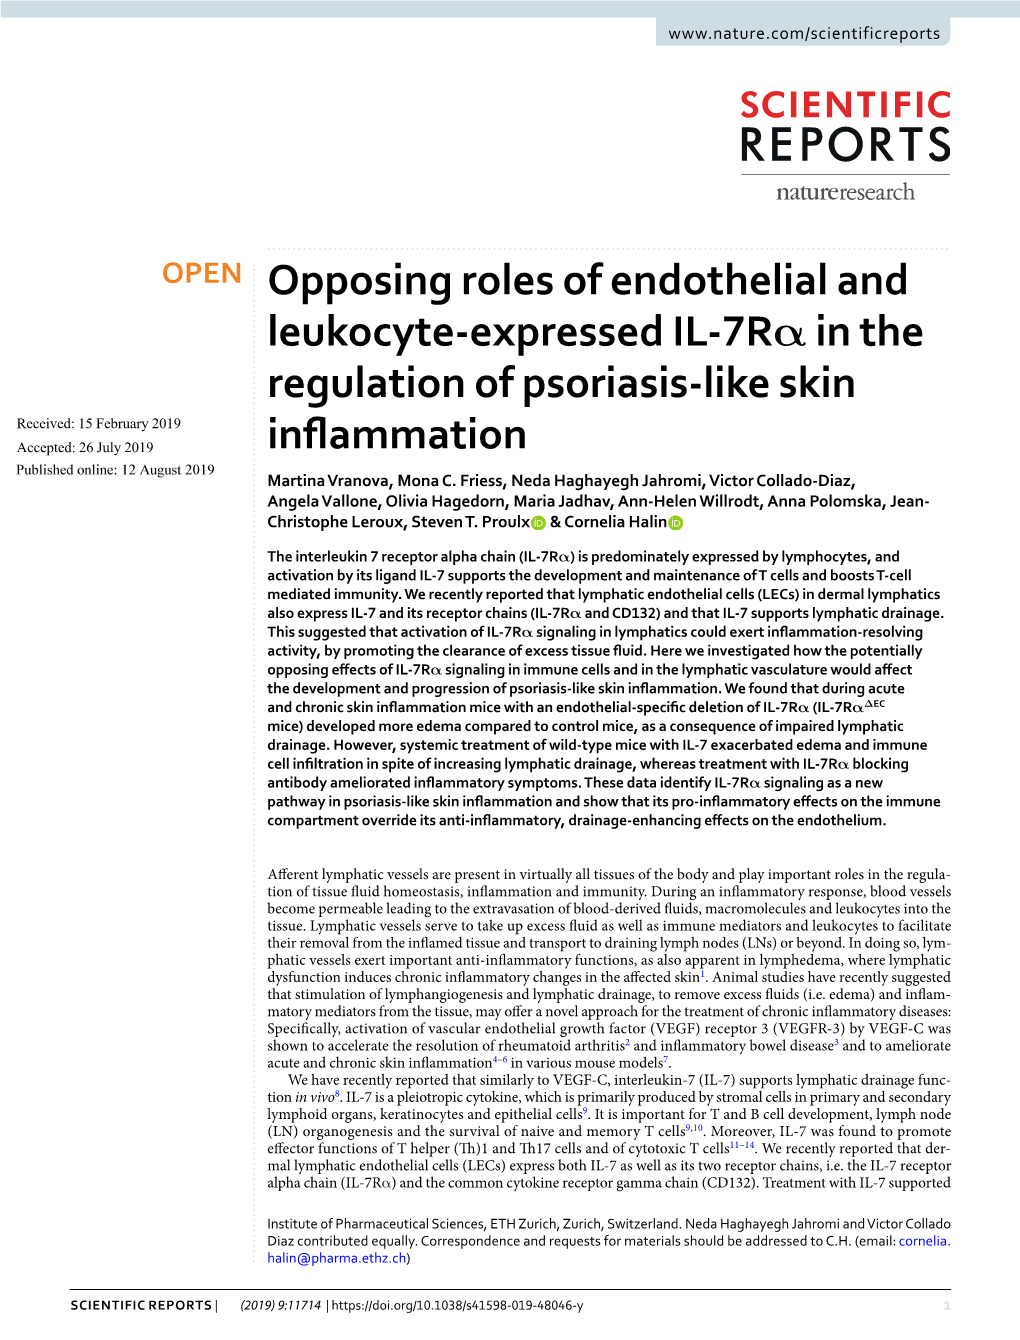 Opposing Roles of Endothelial and Leukocyte-Expressed IL-7Rα in The